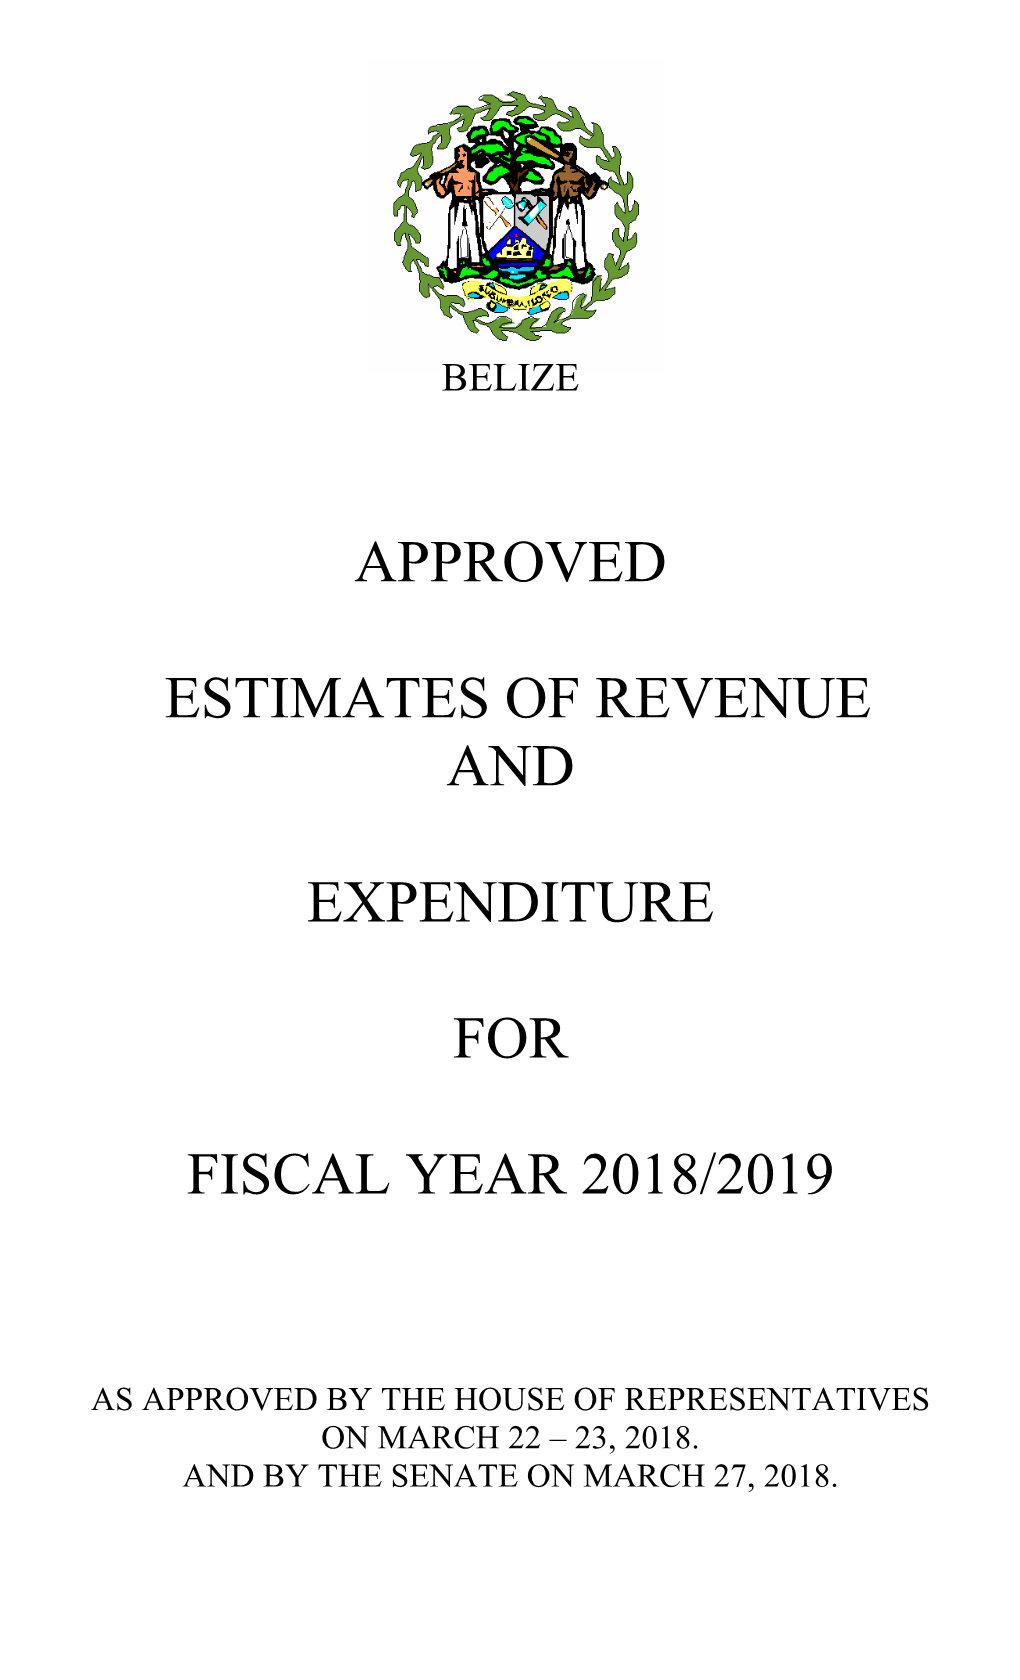 Approved Estimates of Revenue and Expenditure for Fiscal Year 2018/2019